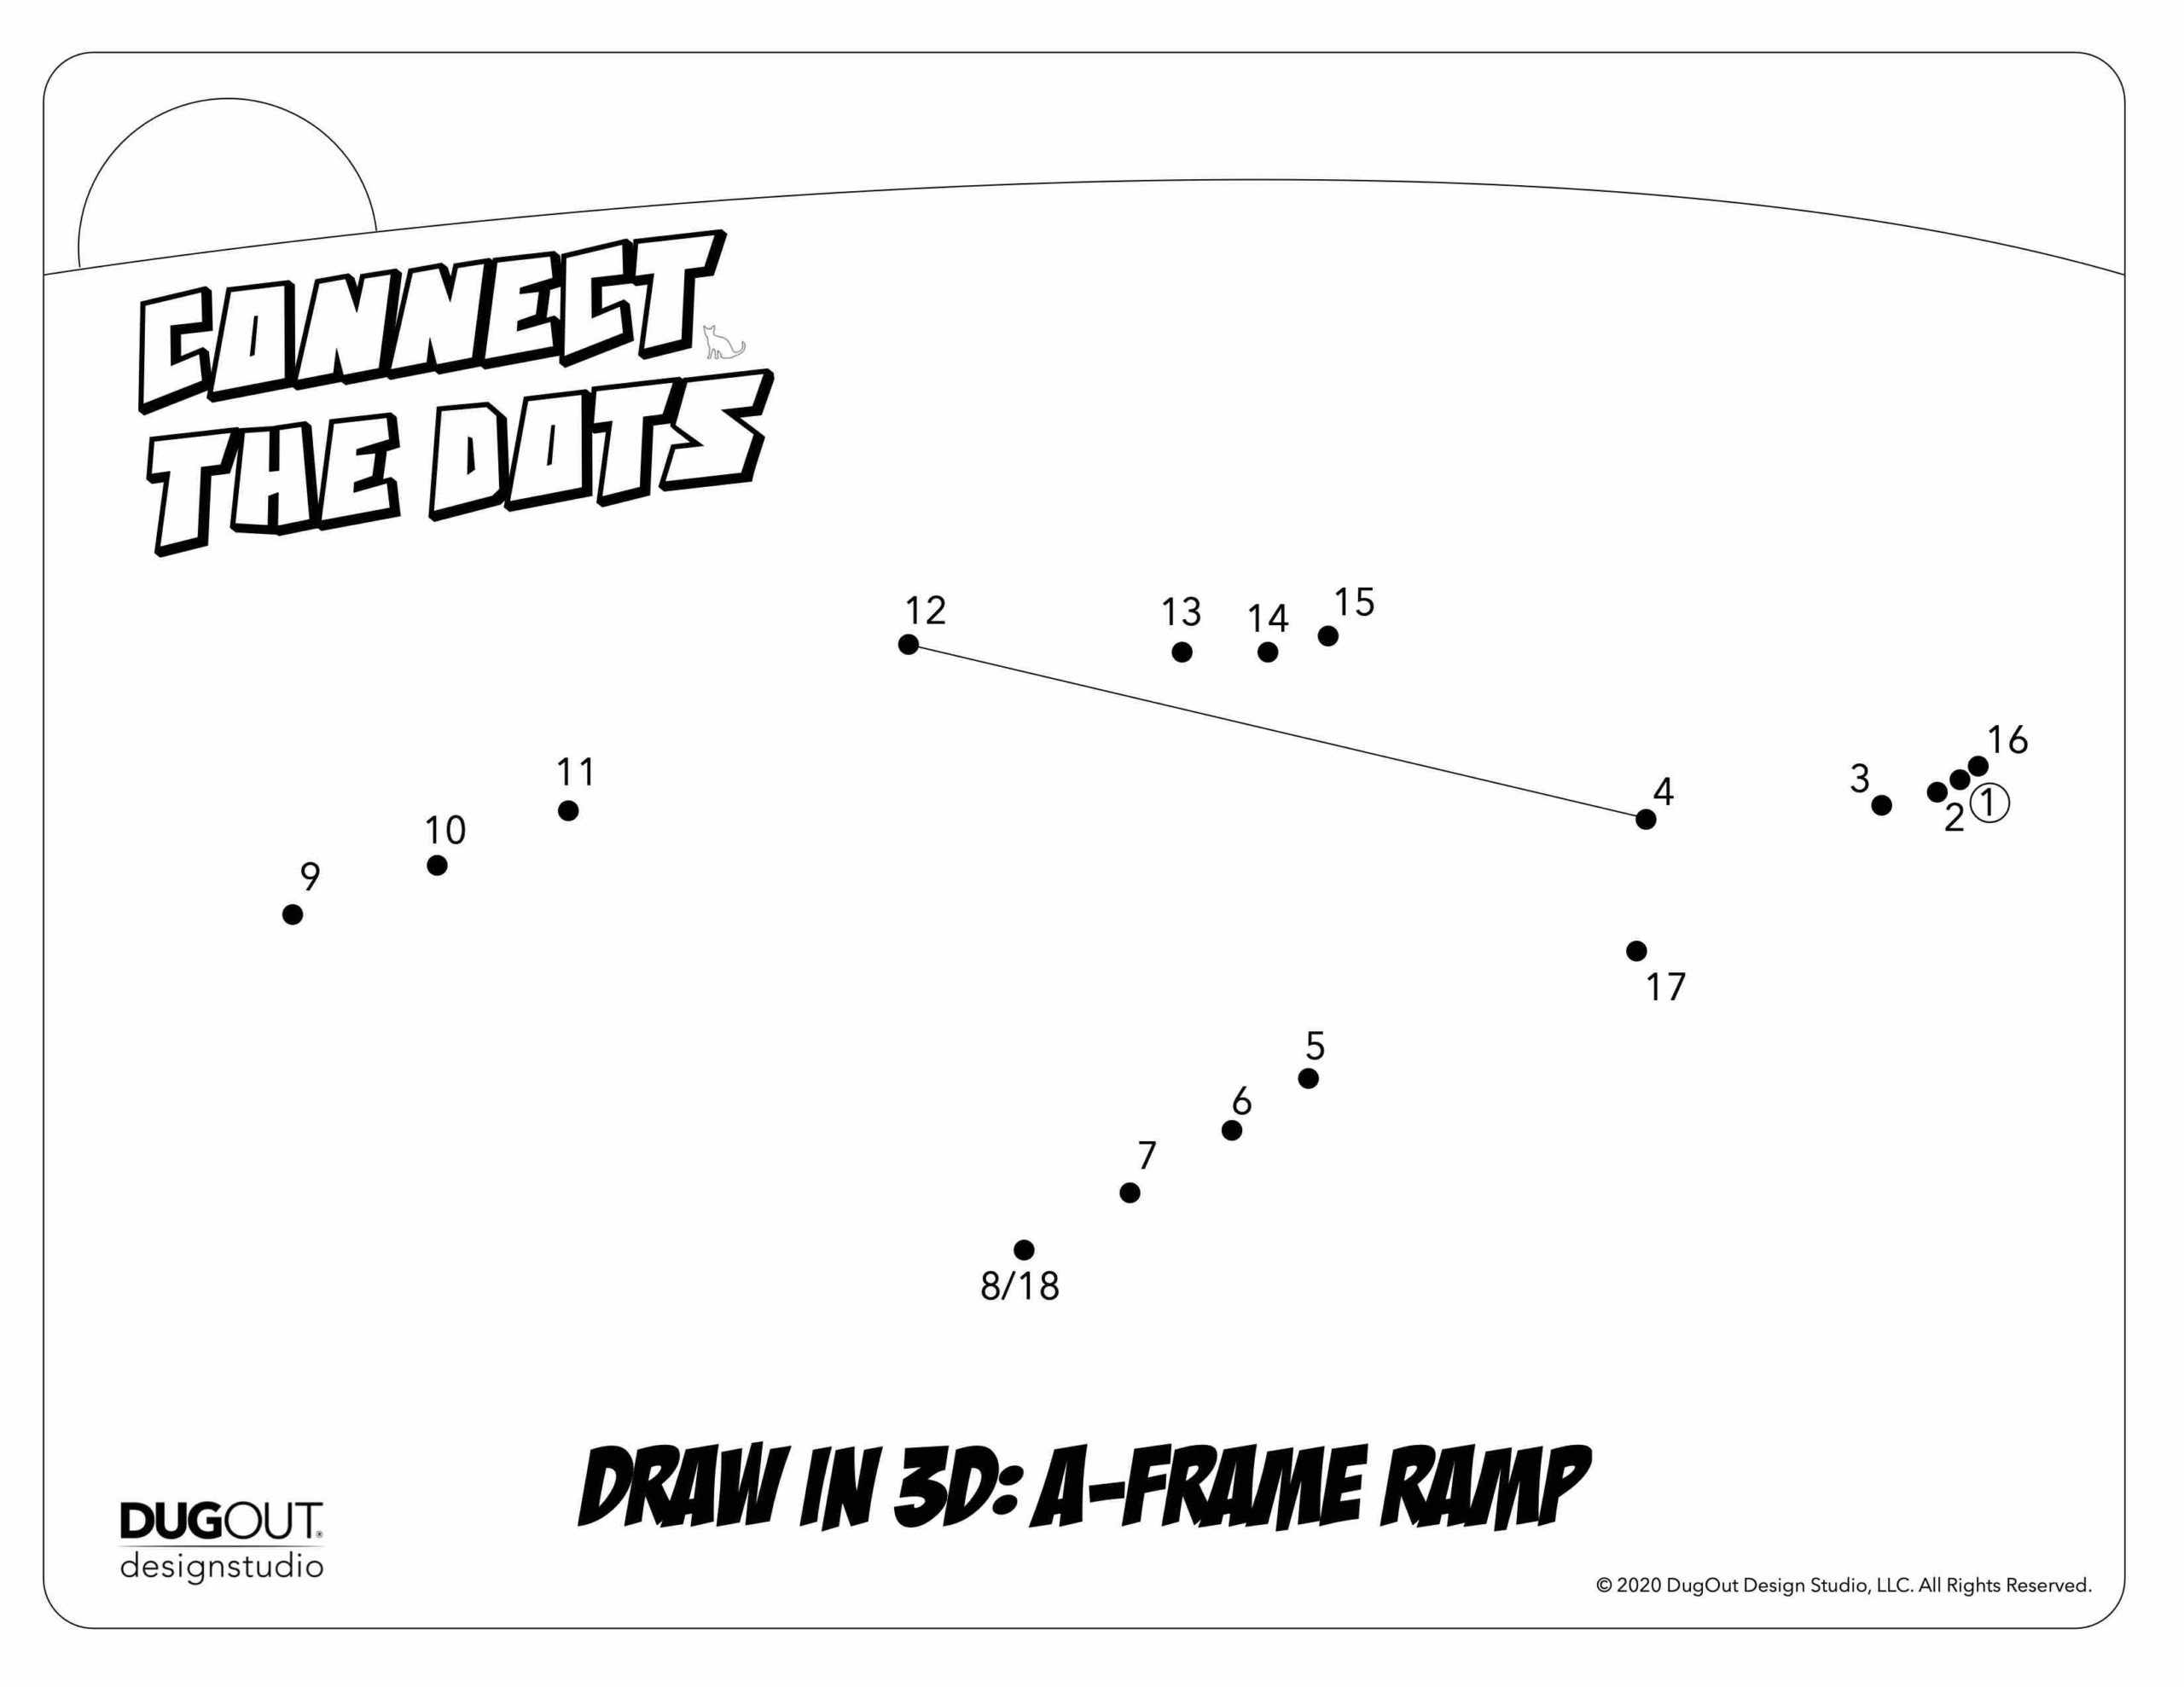 Connect the Dots: Learn to draw a 3D A-Frame Ramp